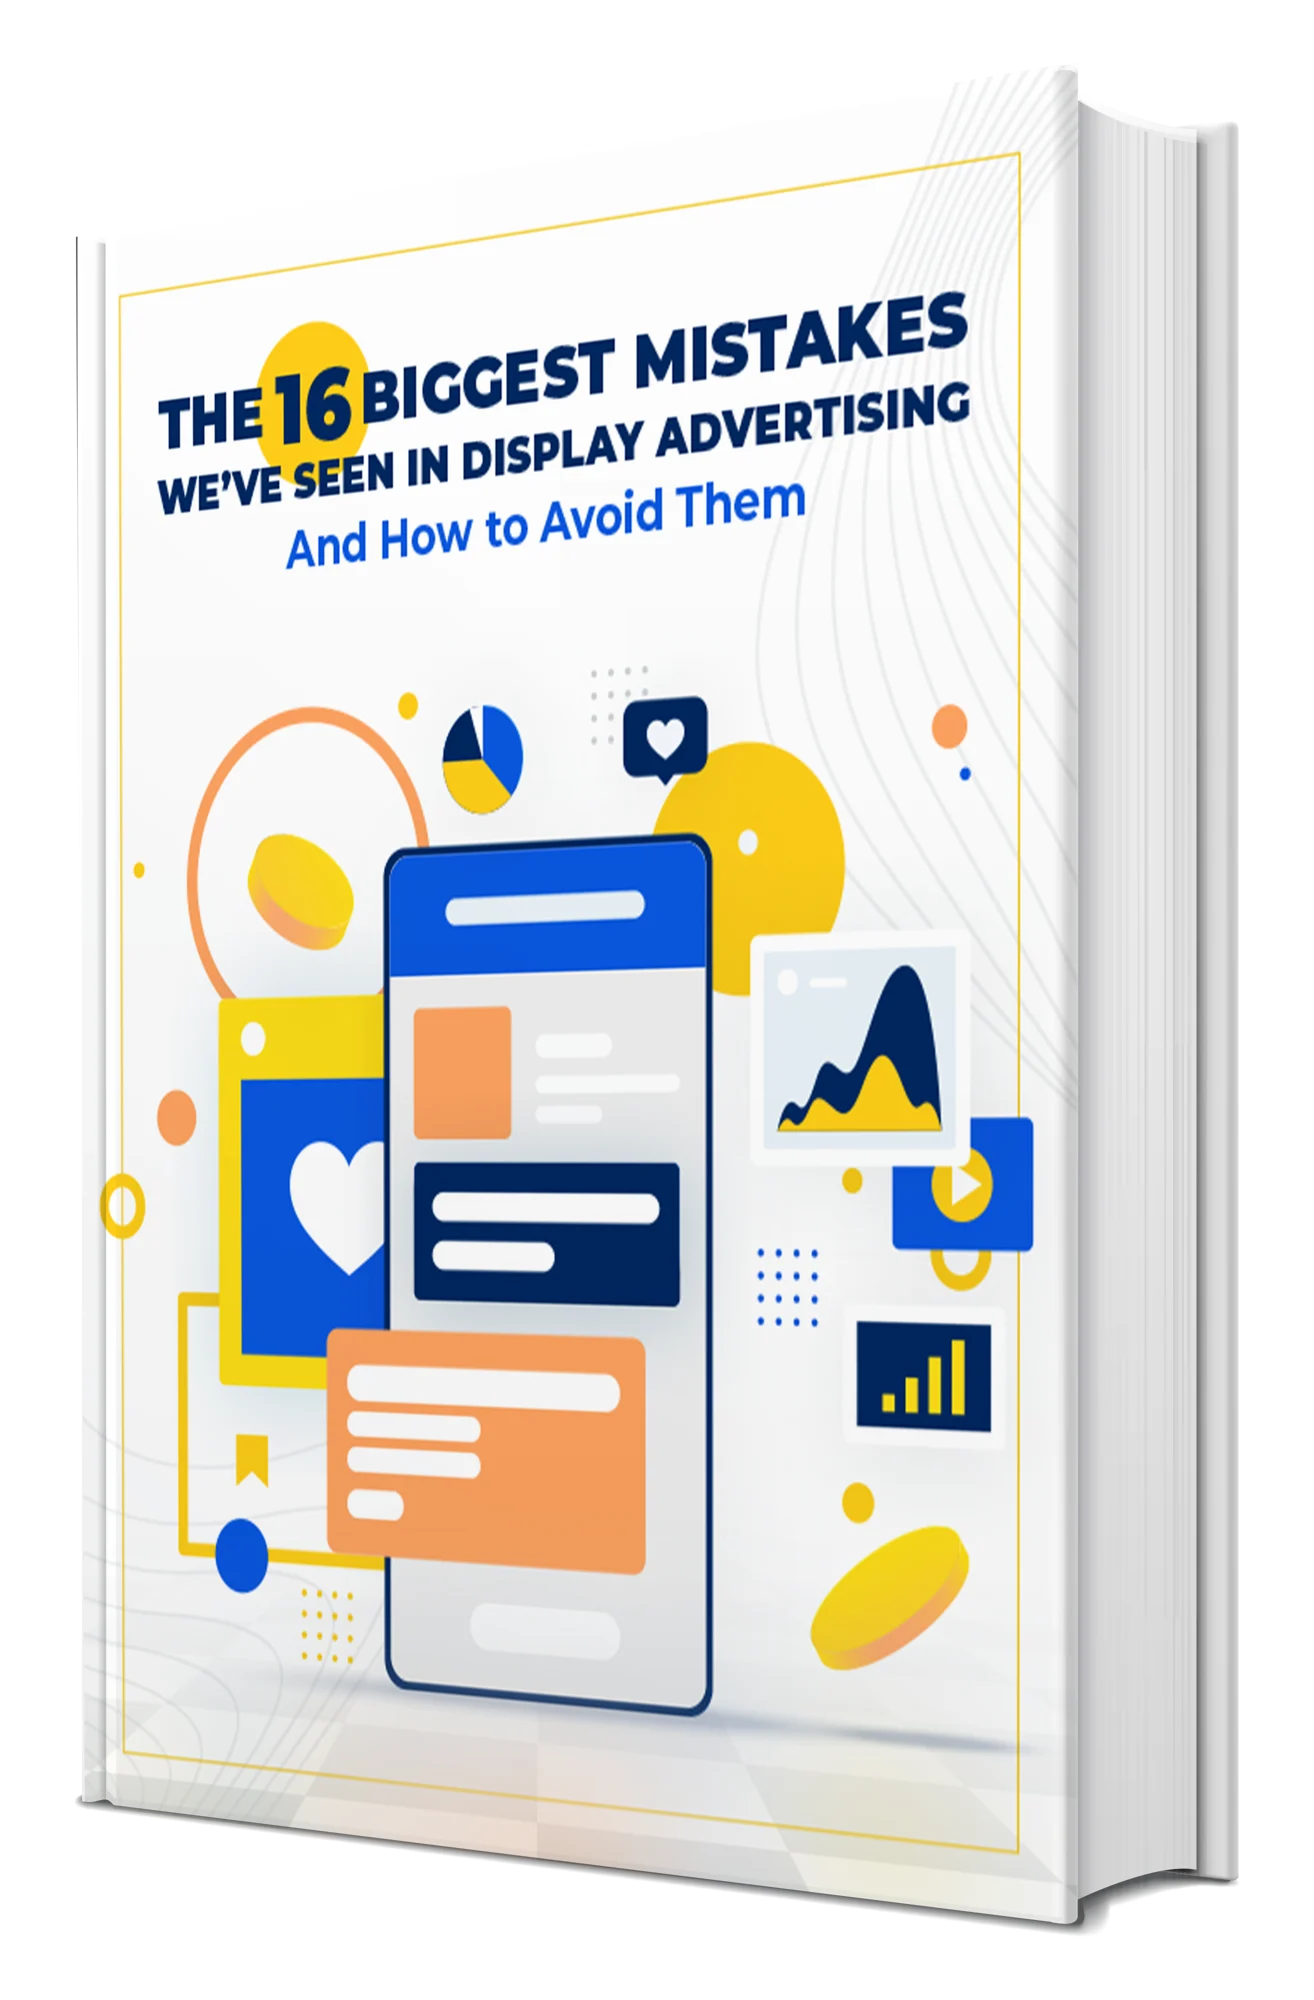 The 16 Biggest Mistakes We’ve Seen in Display Advertising (and How to Avoid Them)